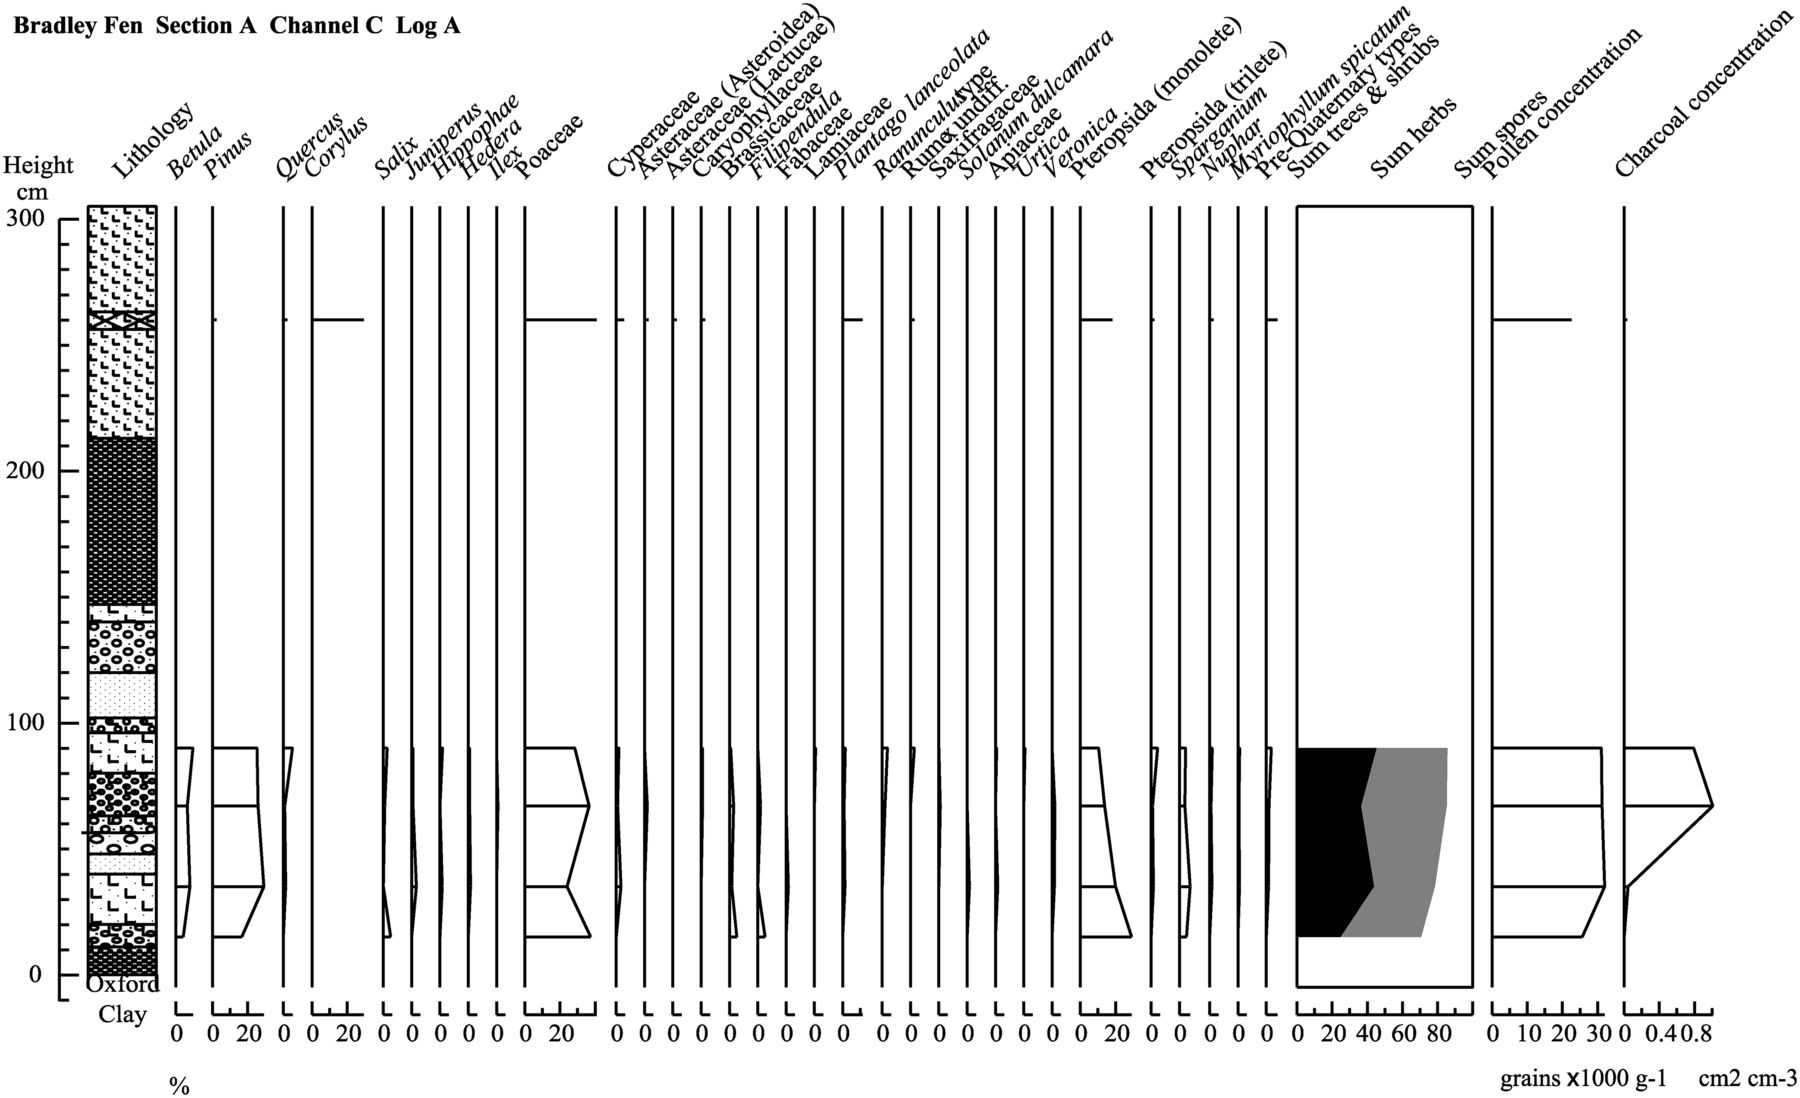 Relative Dating Worksheet Answers and Evidence for the Early Onset Of the Ipswichian thermal Optimum